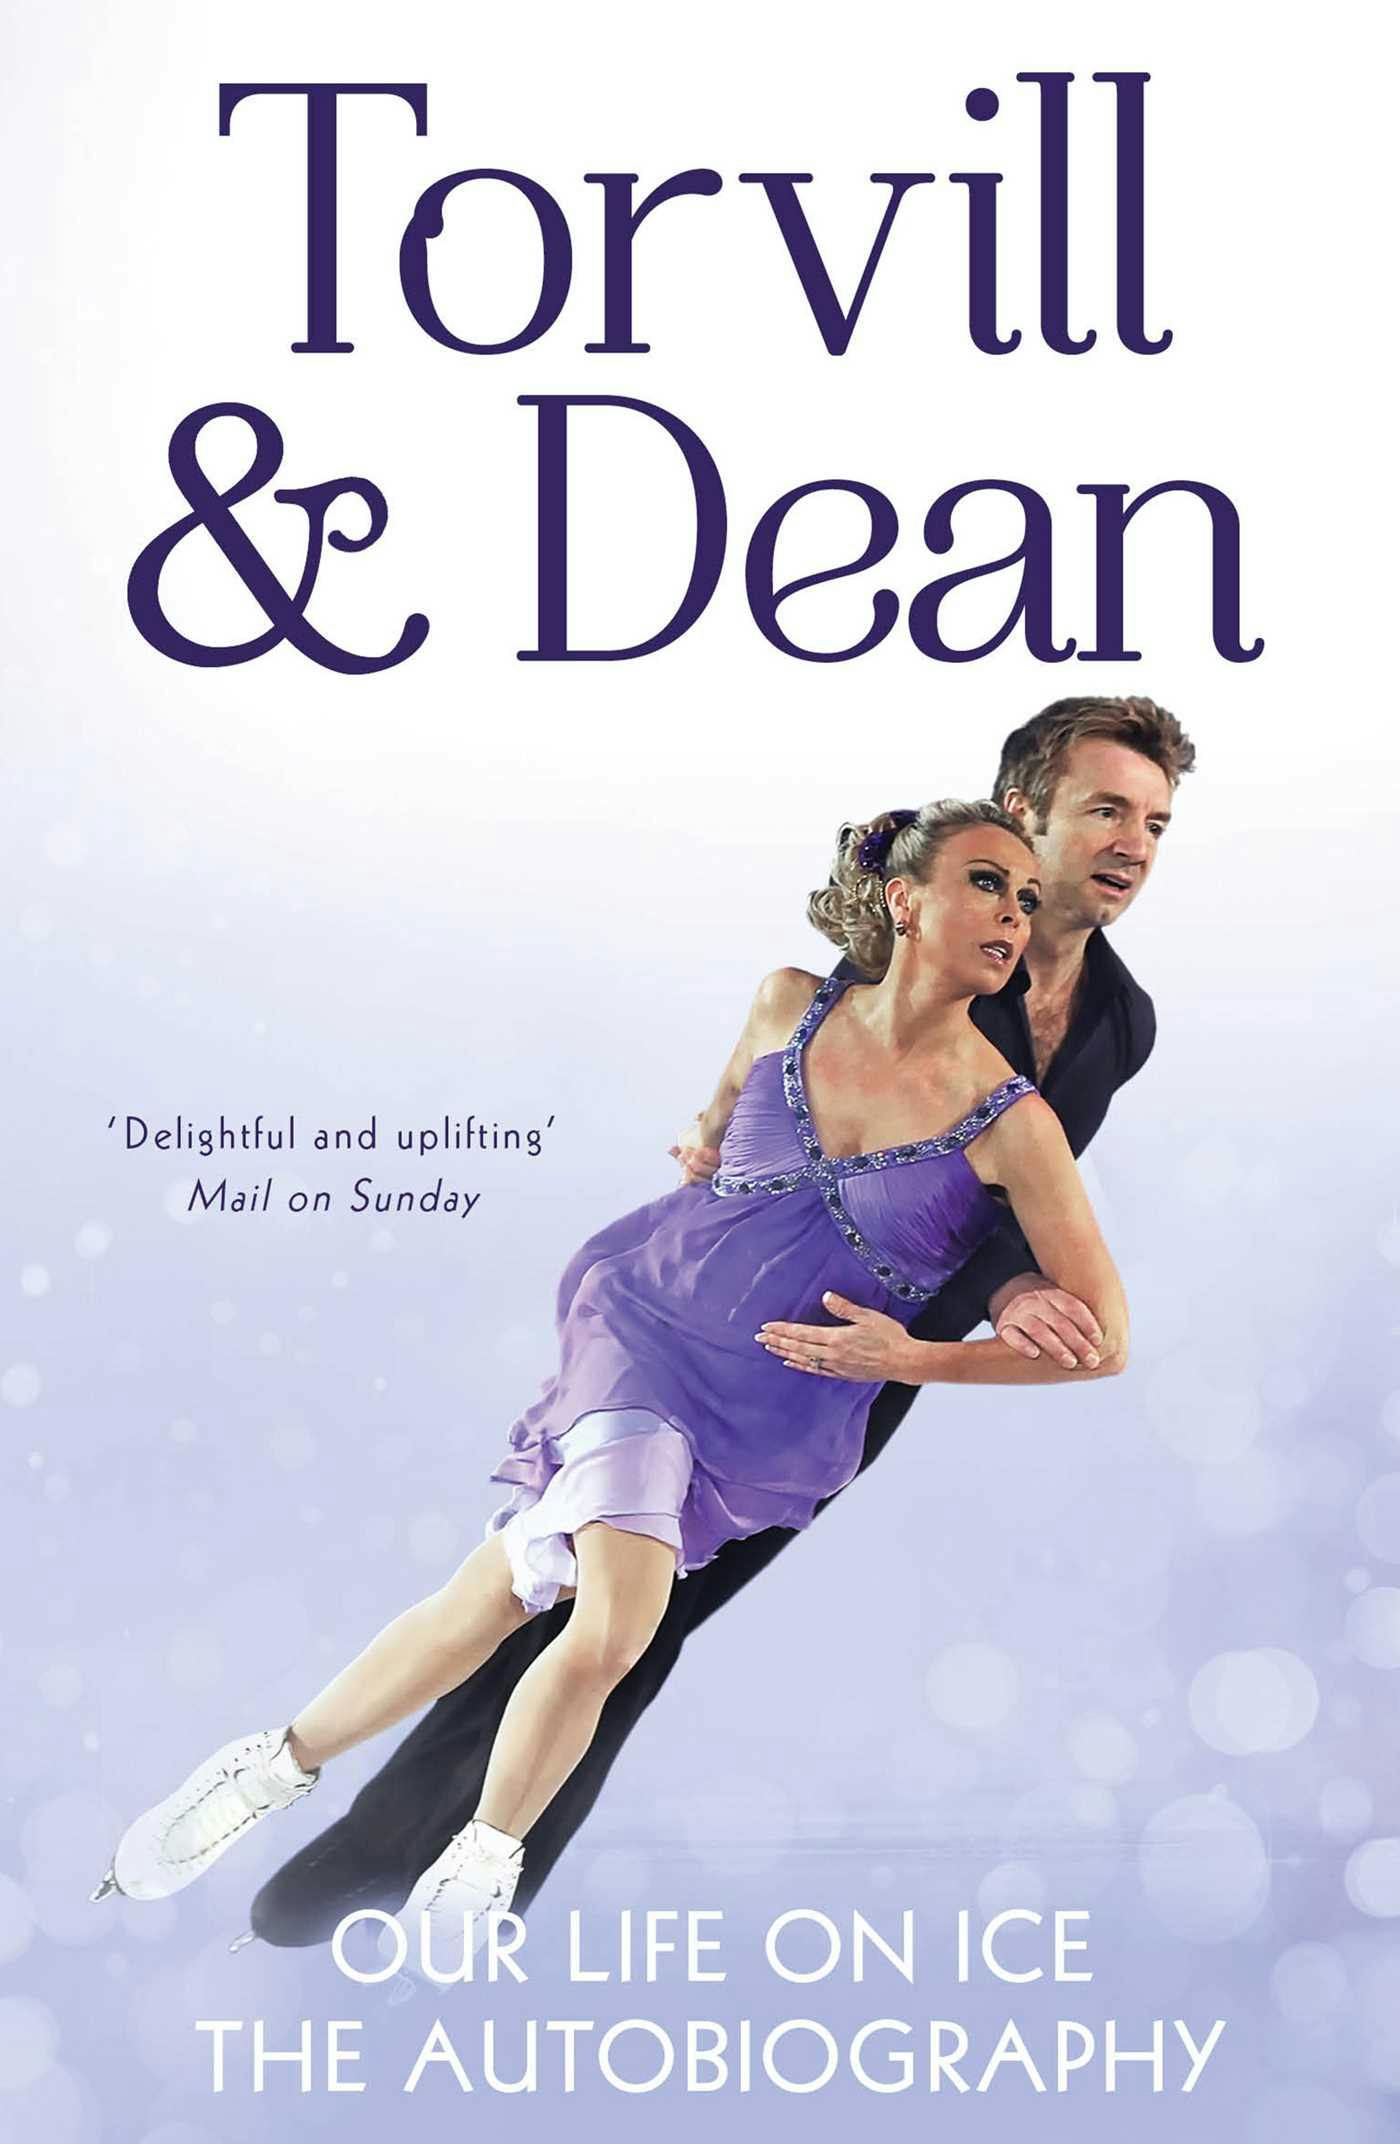 Our Life on Ice: The Autobiography - Christopher Dean, Jayne Torvill